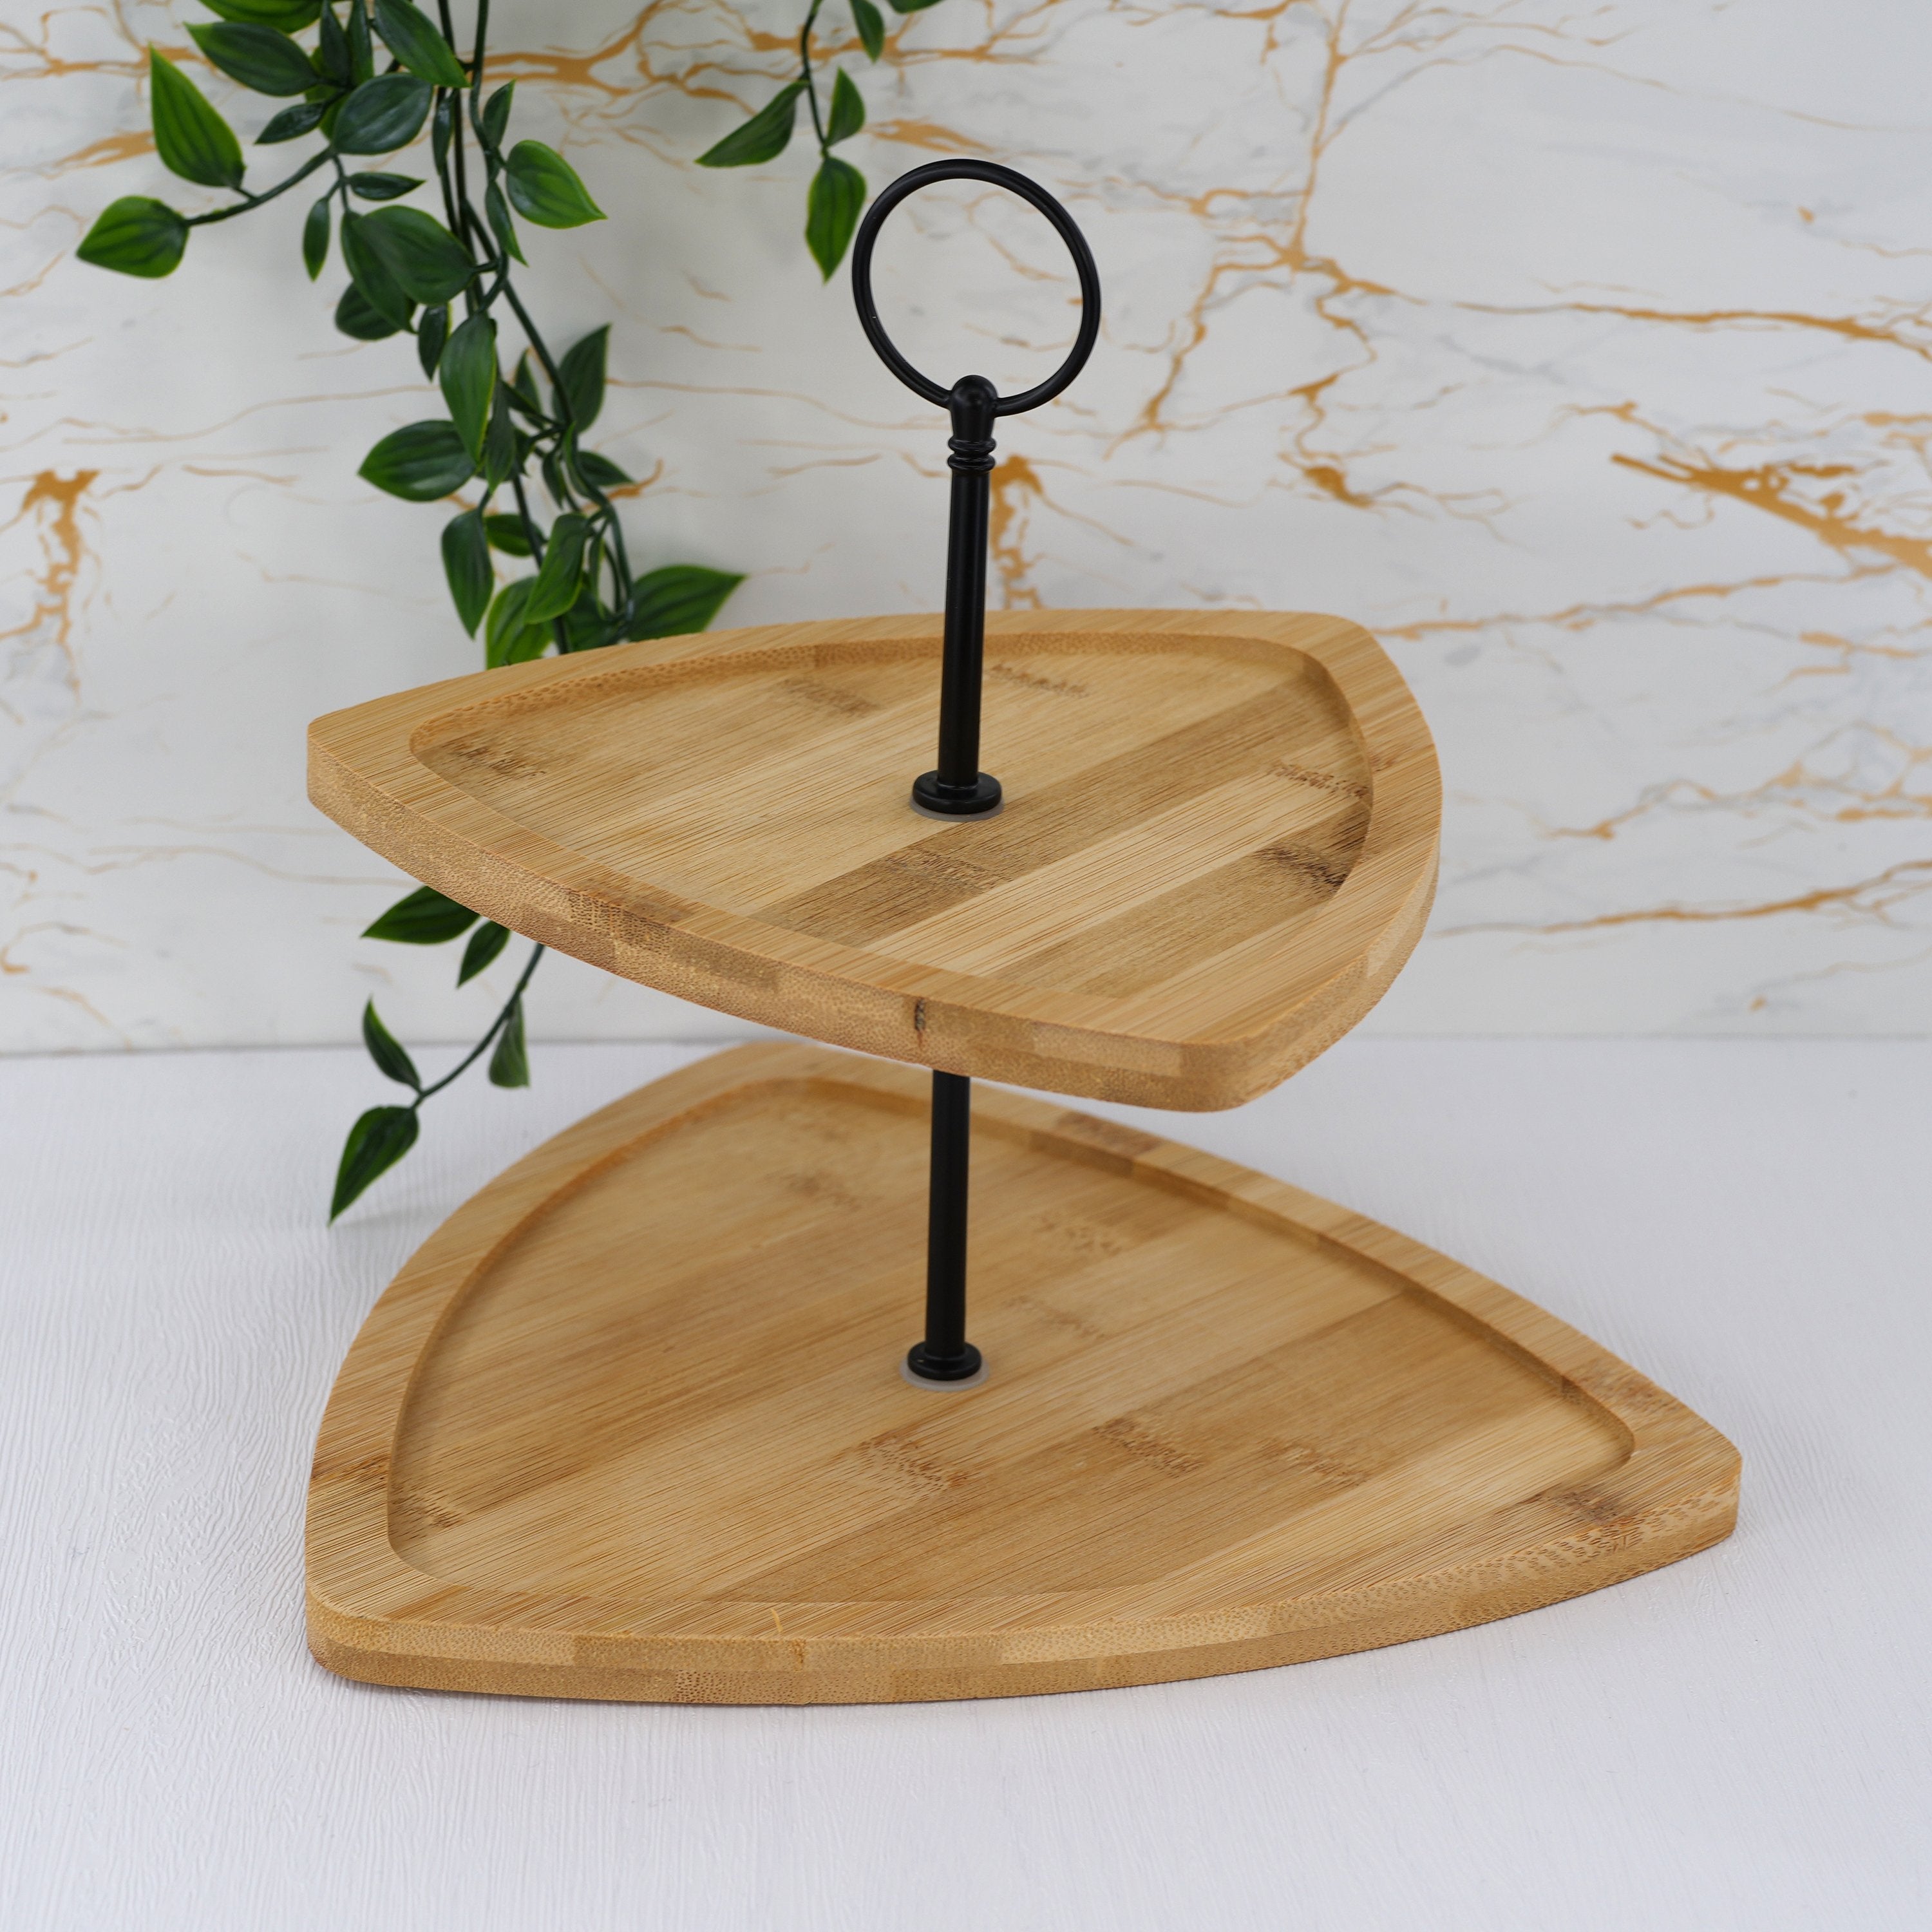 2 Tier Wooden Serving Stand GEEZY - The Magic Toy Shop